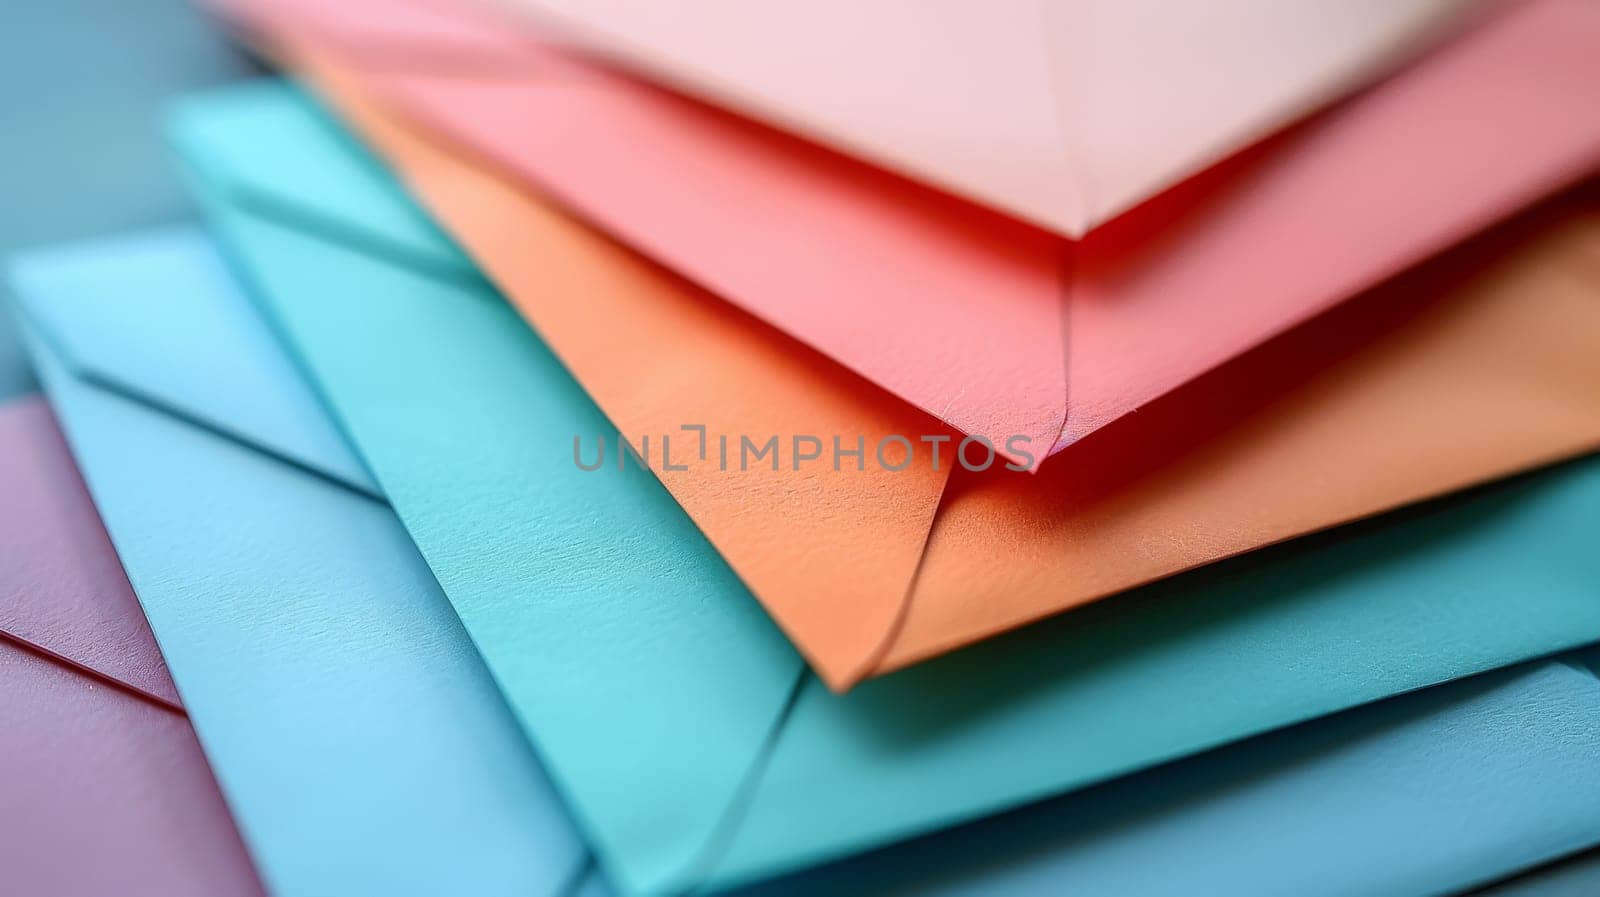 A stack of colorful envelopes on a wooden table. The envelopes are arranged in a rainbow pattern, with each envelope a different color. Concept of joy and celebration